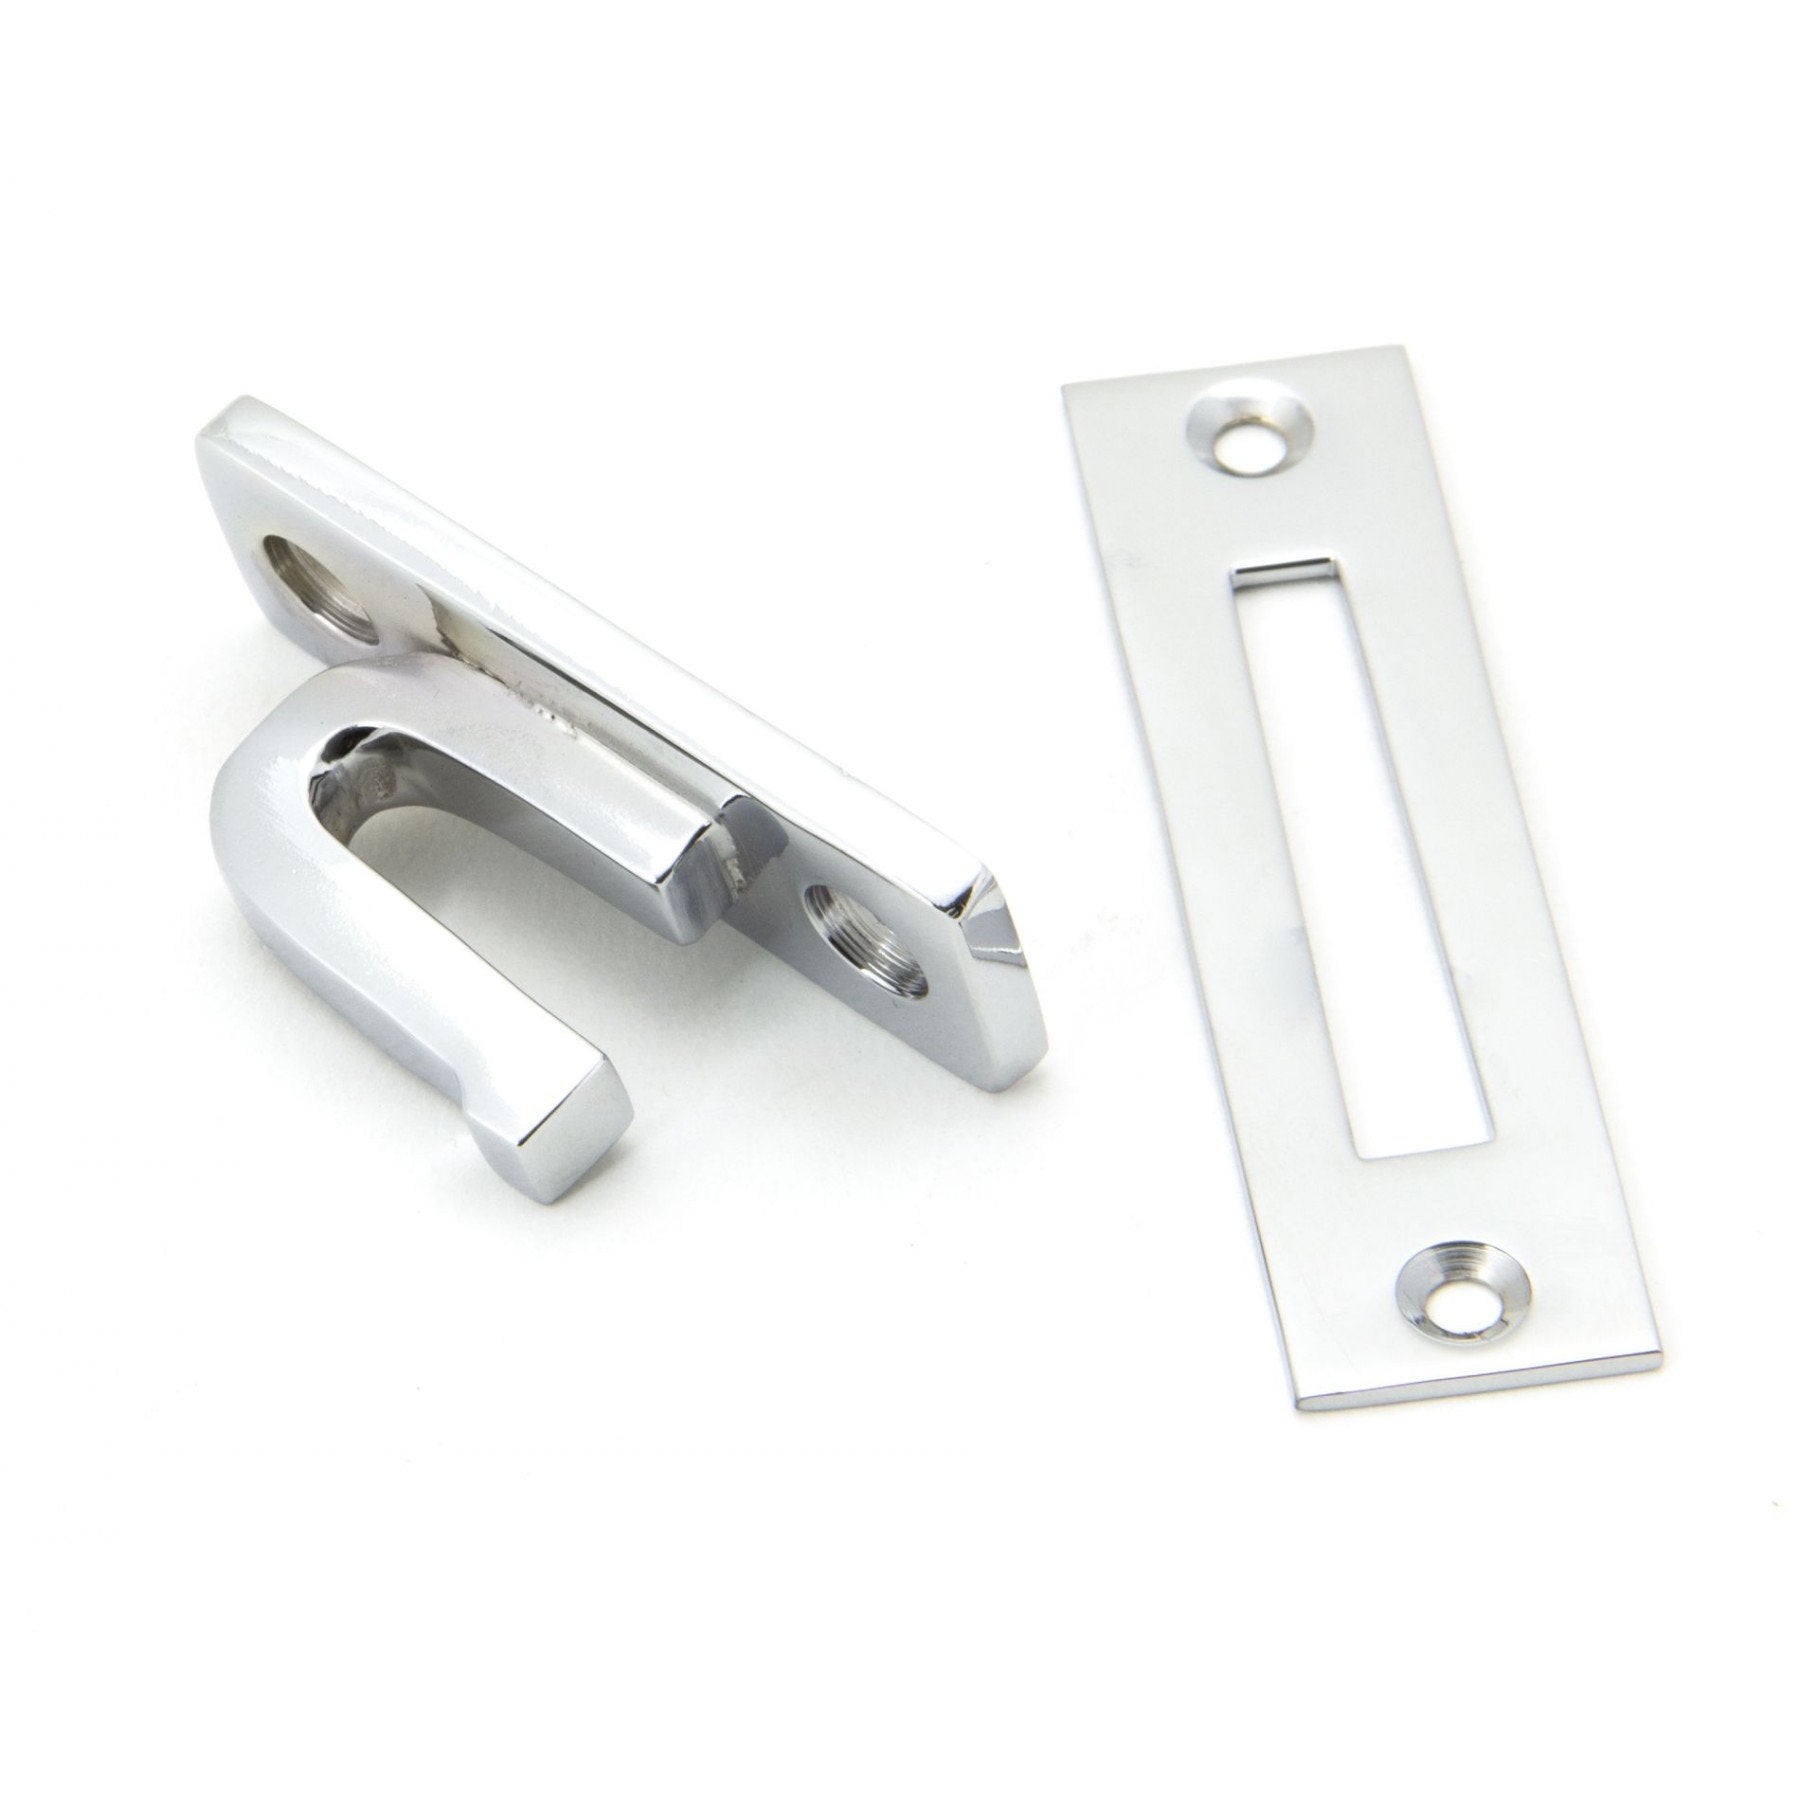 From the Anvil Polished Chrome Locking Avon Fastener